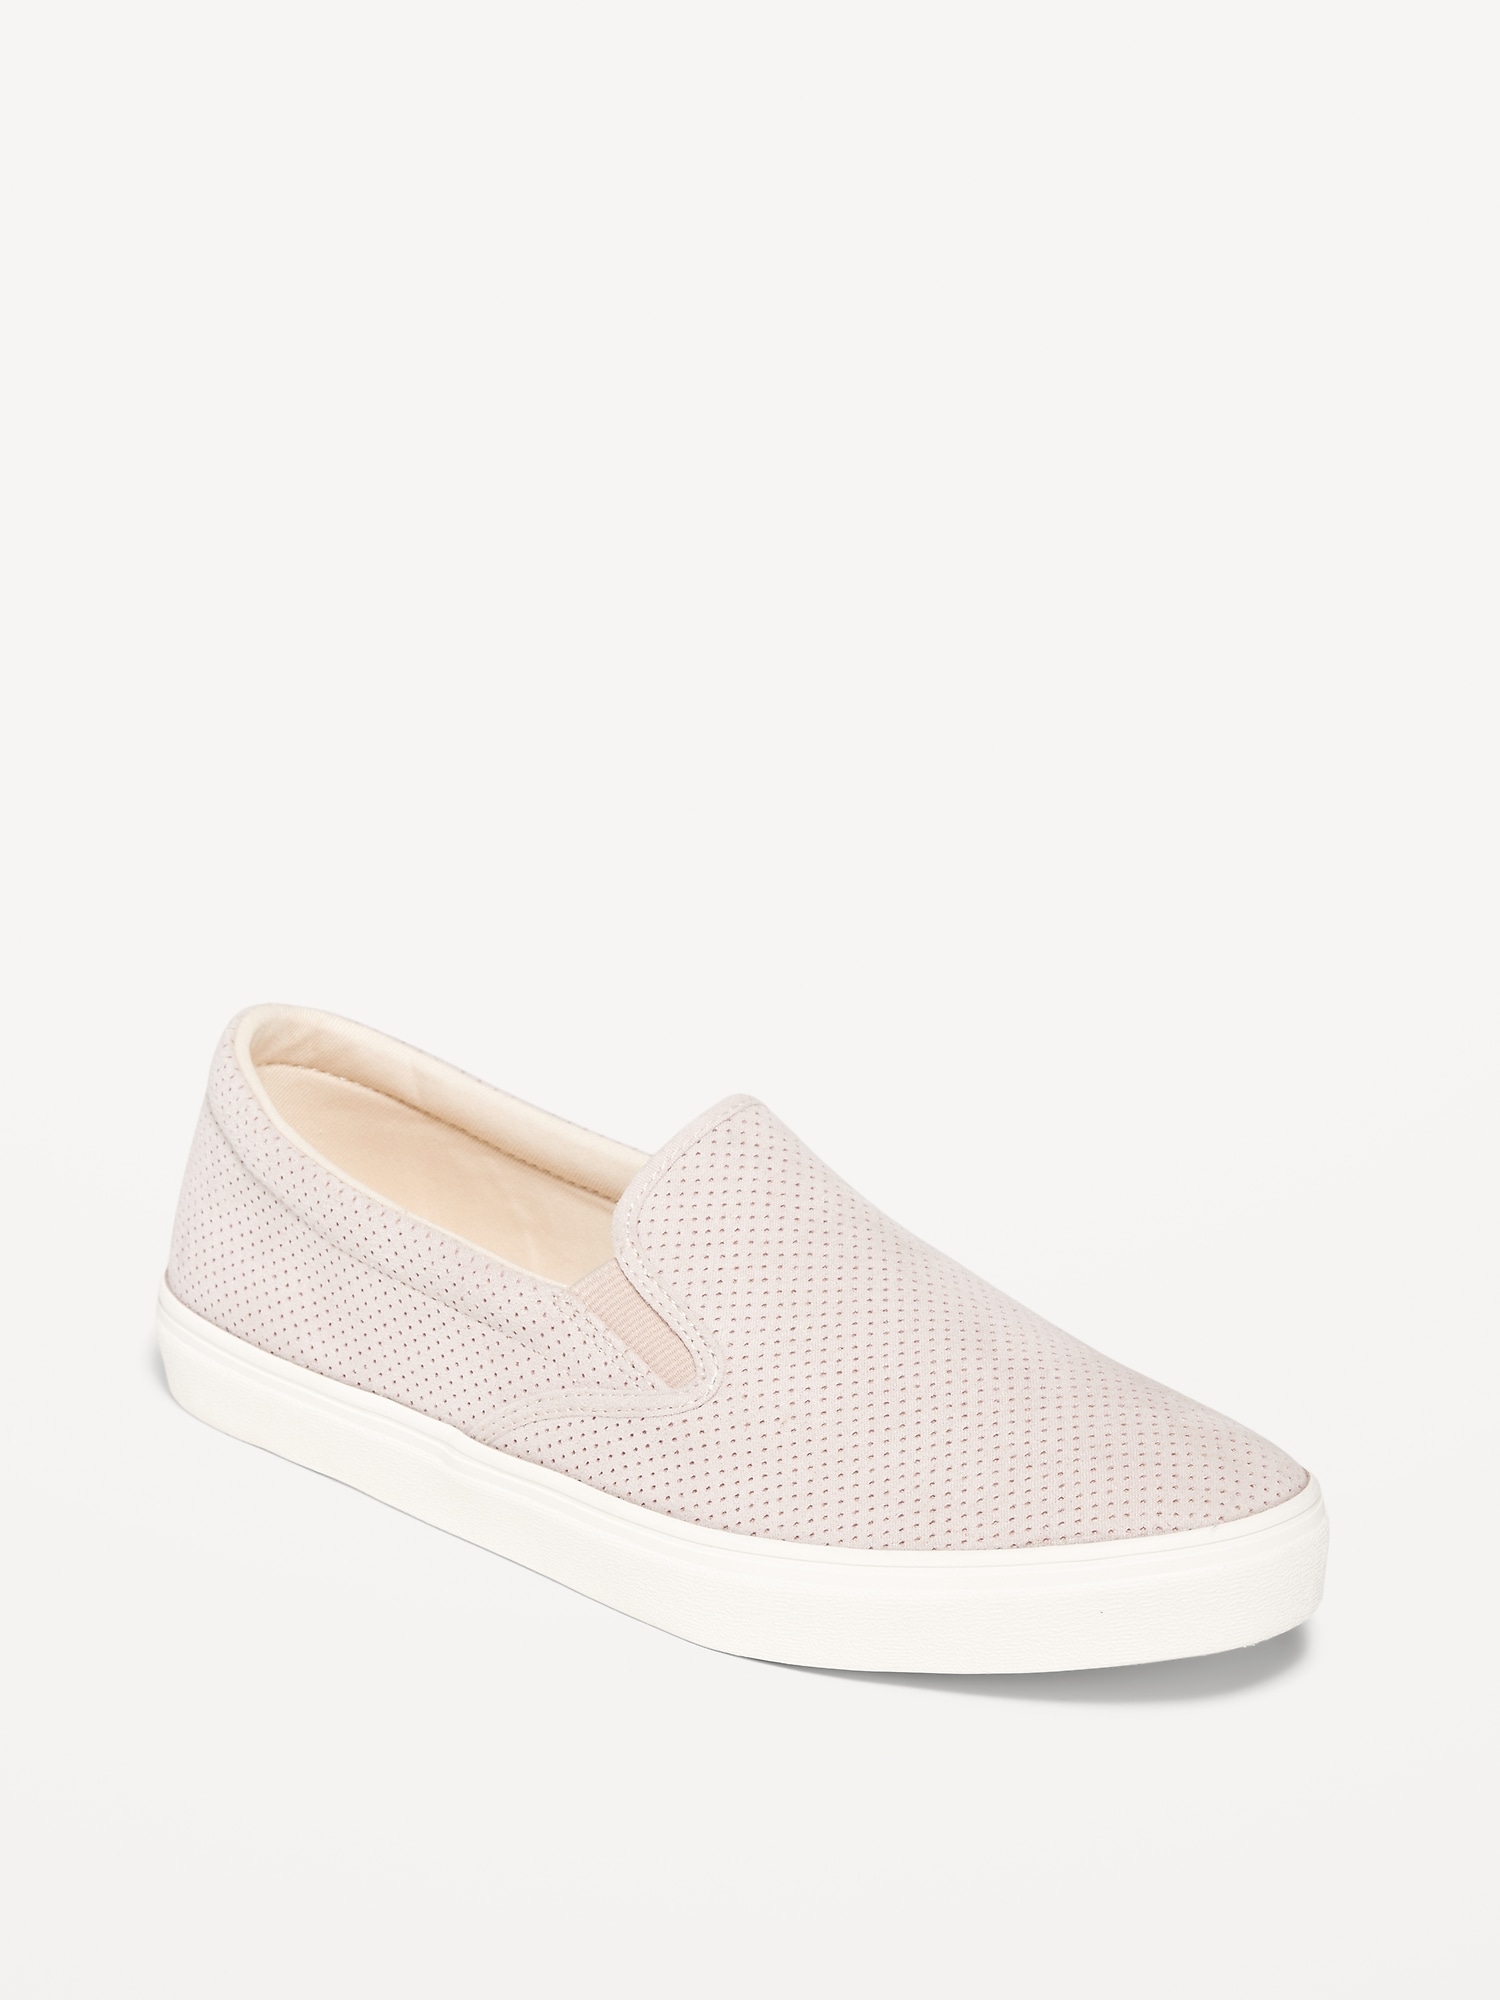 Old Navy Perforated Faux-Suede Slip-On Sneakers for Women beige. 1